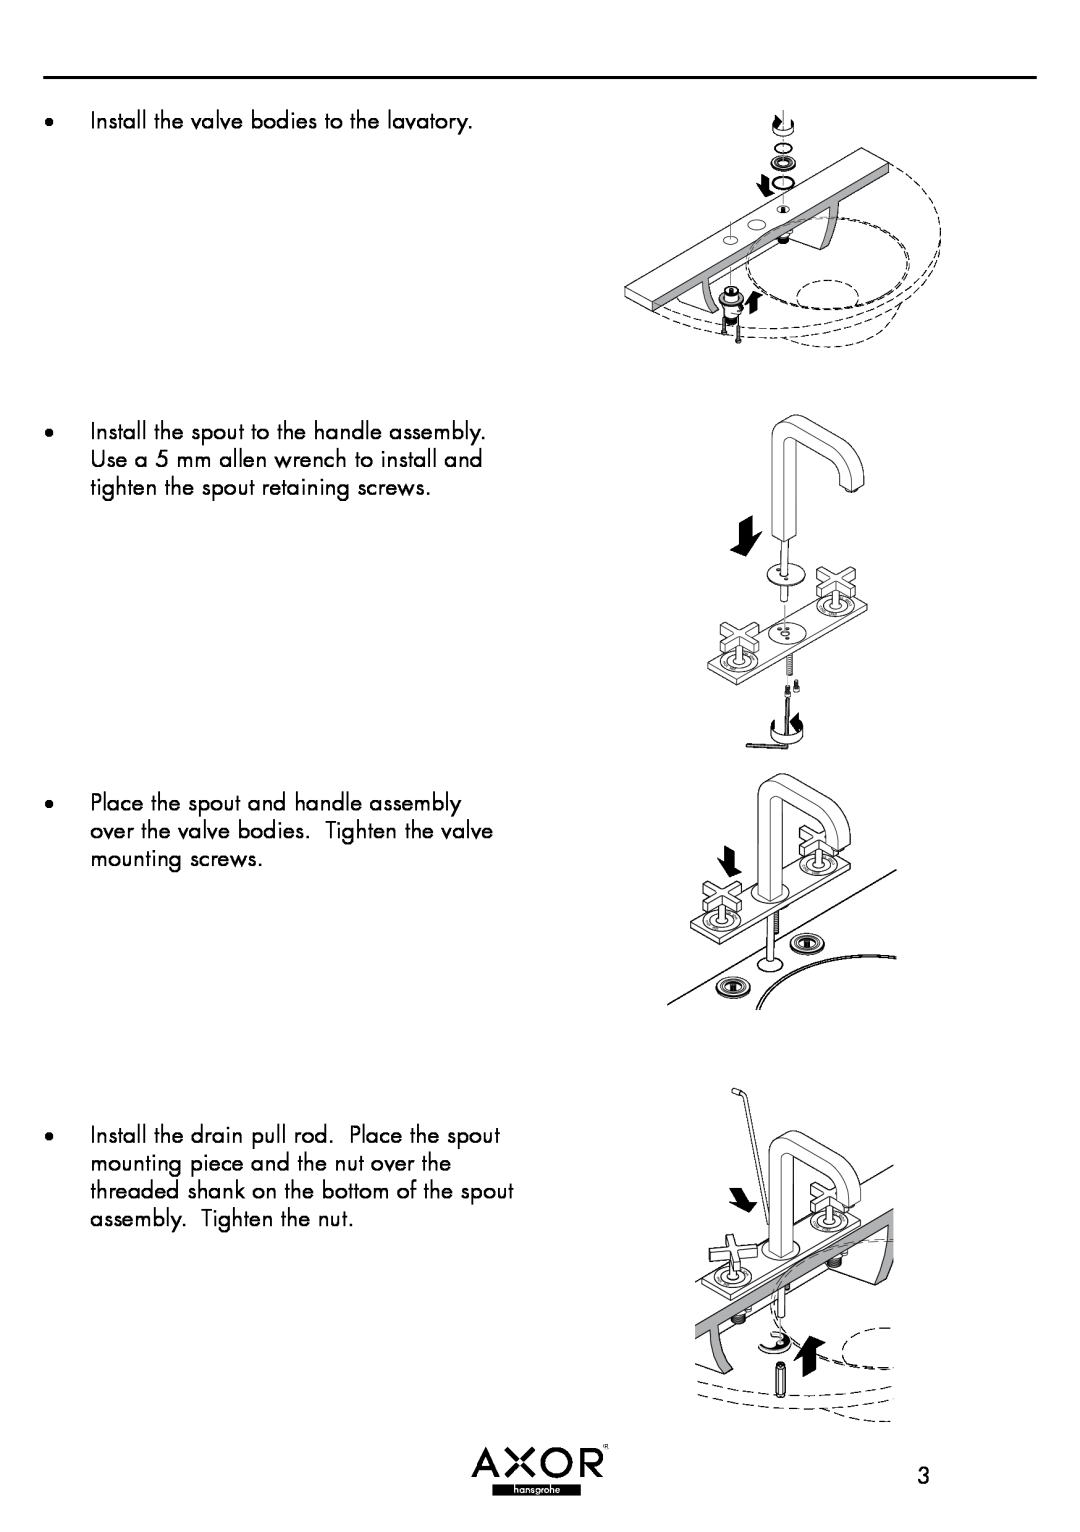 Axor 39154XX1, 39234XX1 installation instructions Install the valve bodies to the lavatory 